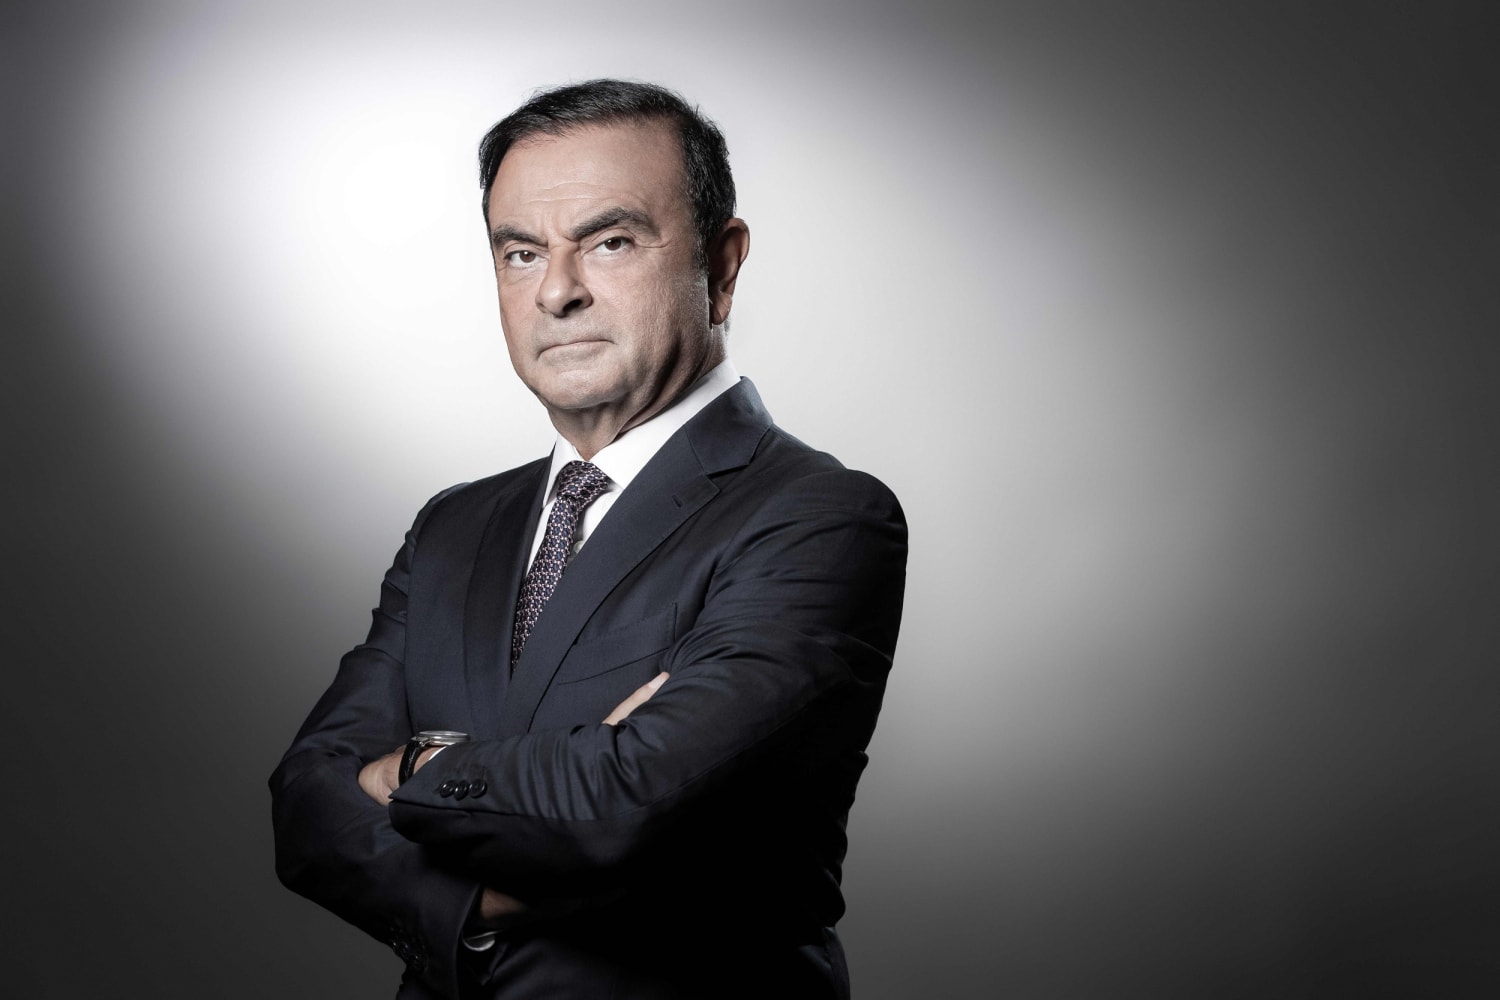 Nissan chairman Carlos Ghosn arrested; misconduct probe finds $44.6 million in hidden pay